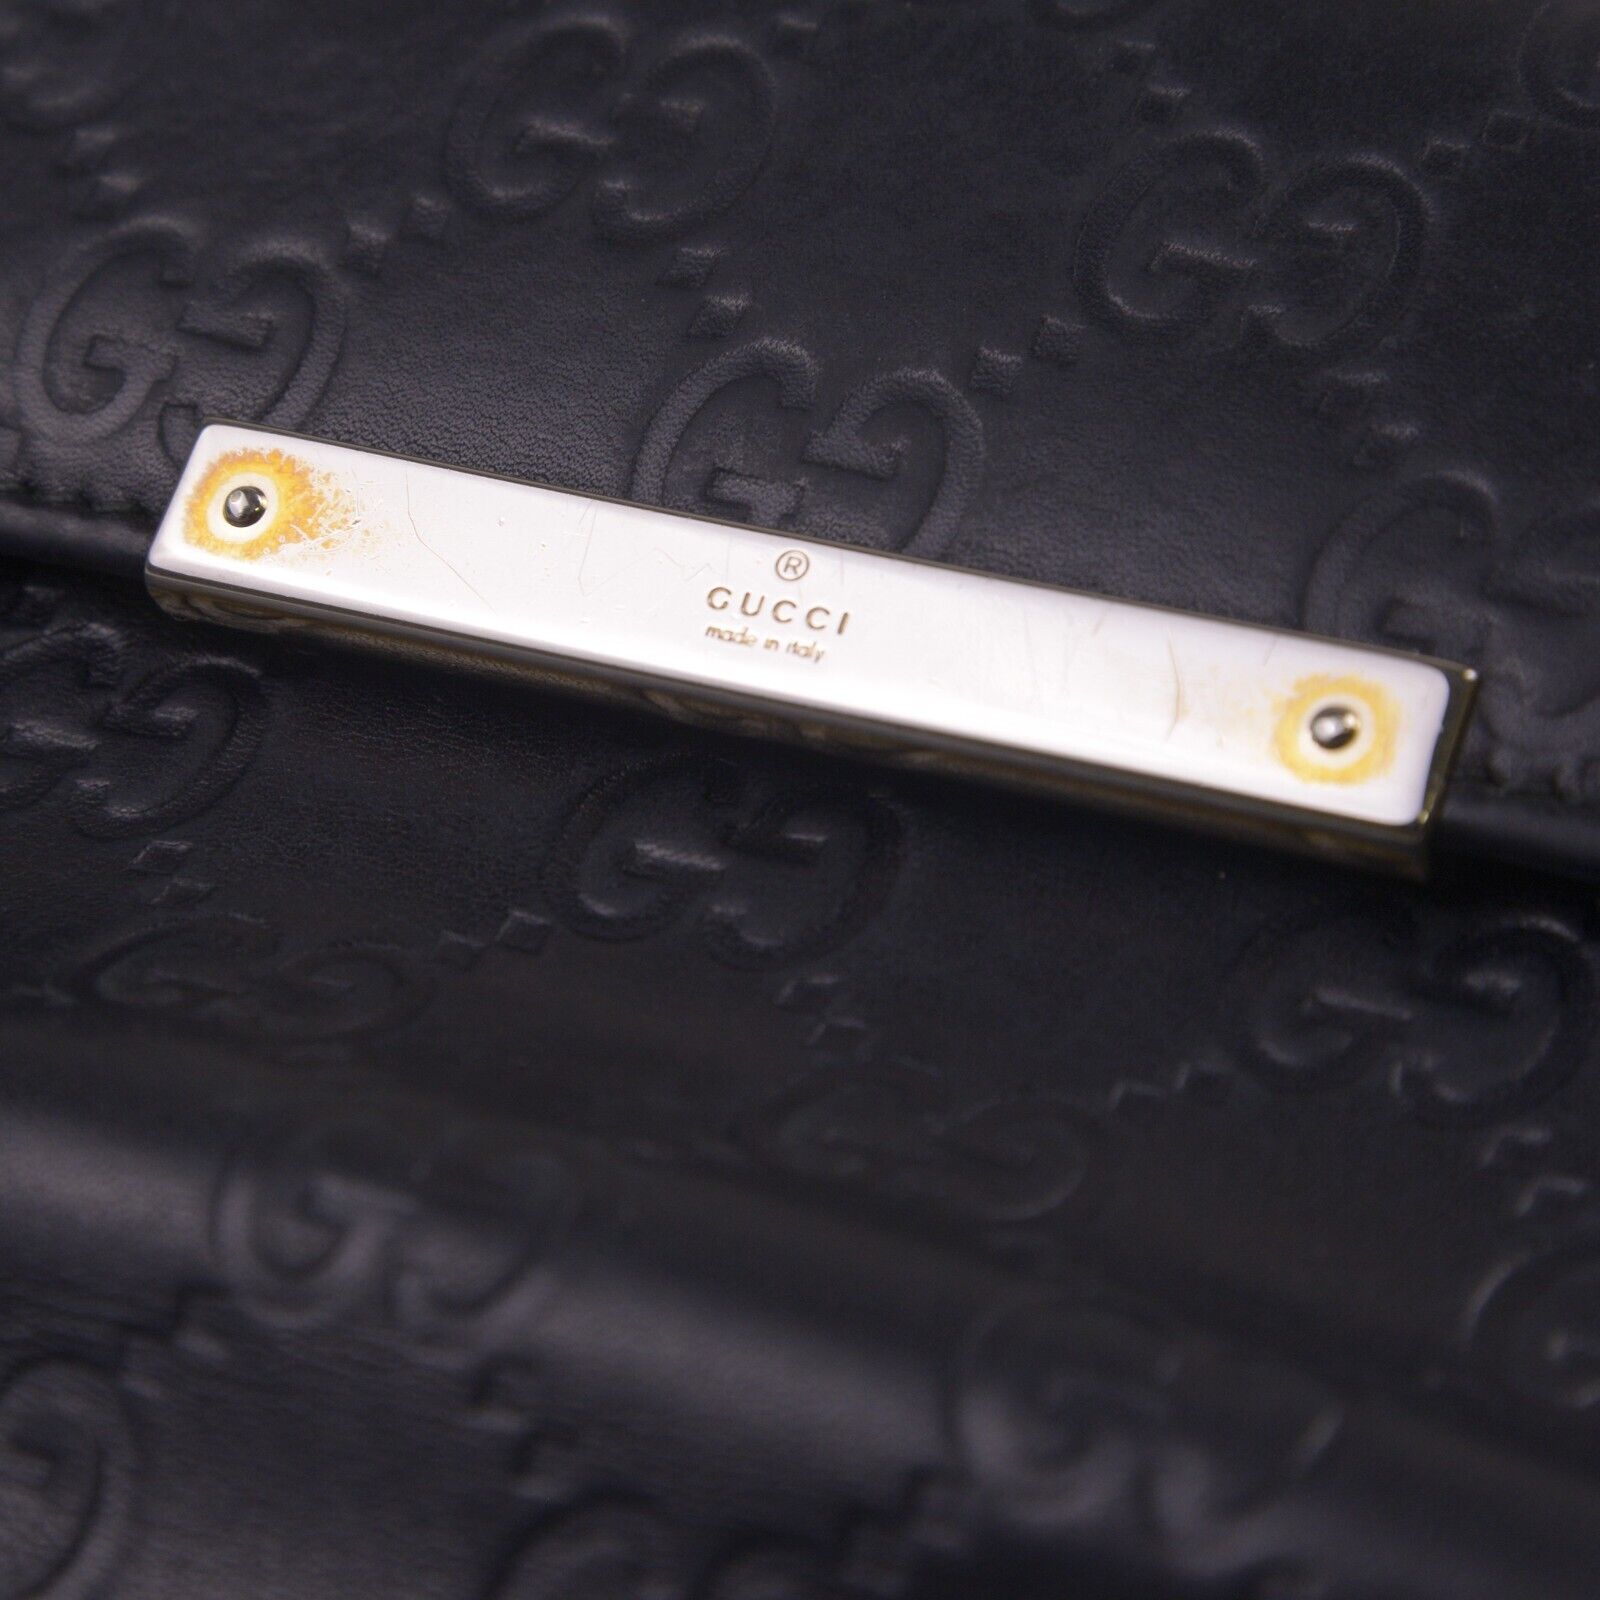 Gucci Black Continental Leather Wallet